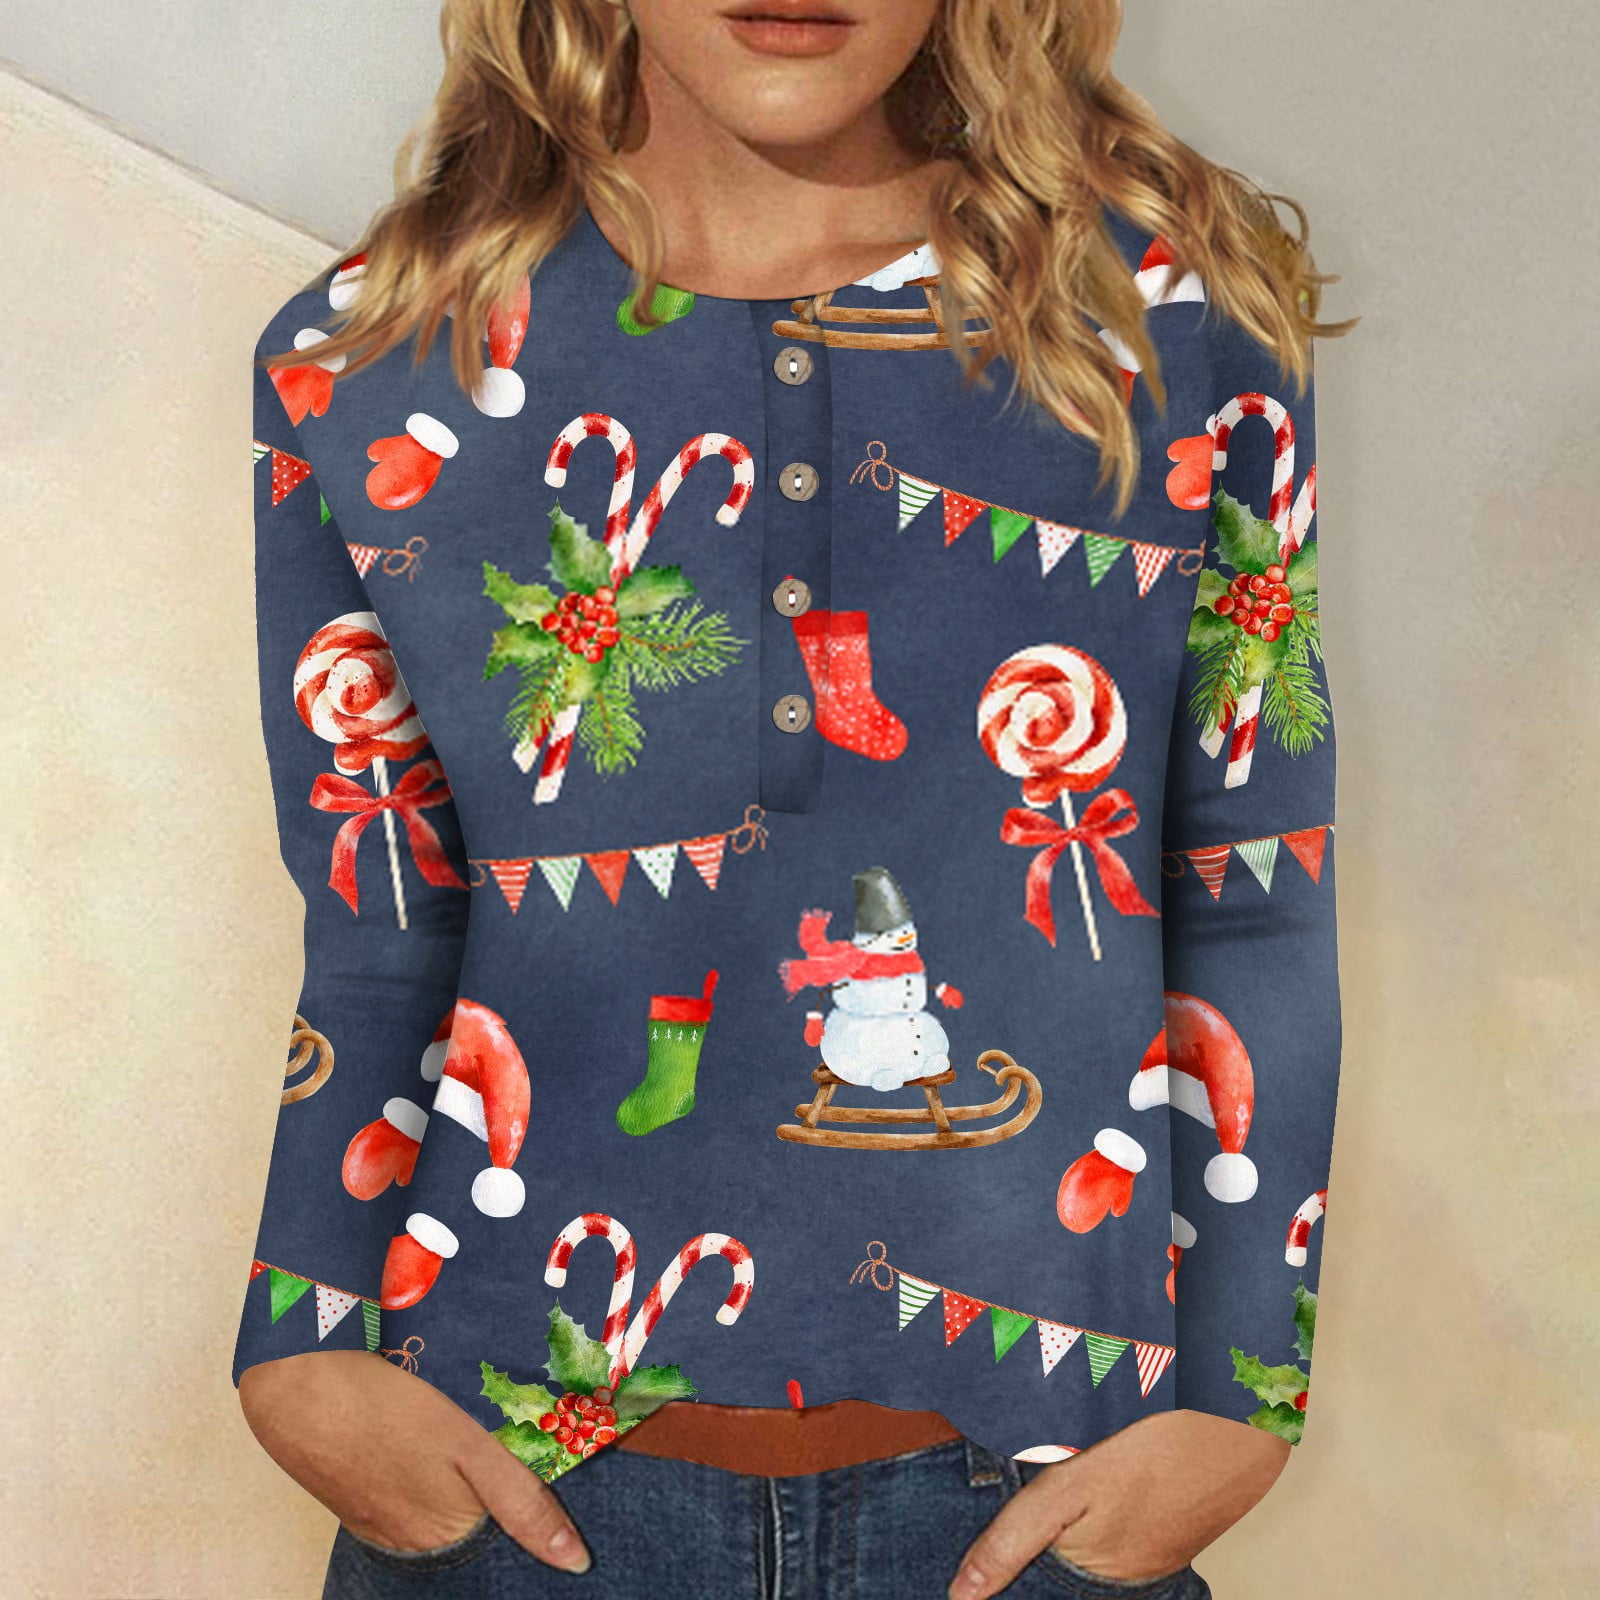 Ydkzymd Christmas Western T Shirts for Women Plus Size Funny Graphic ...